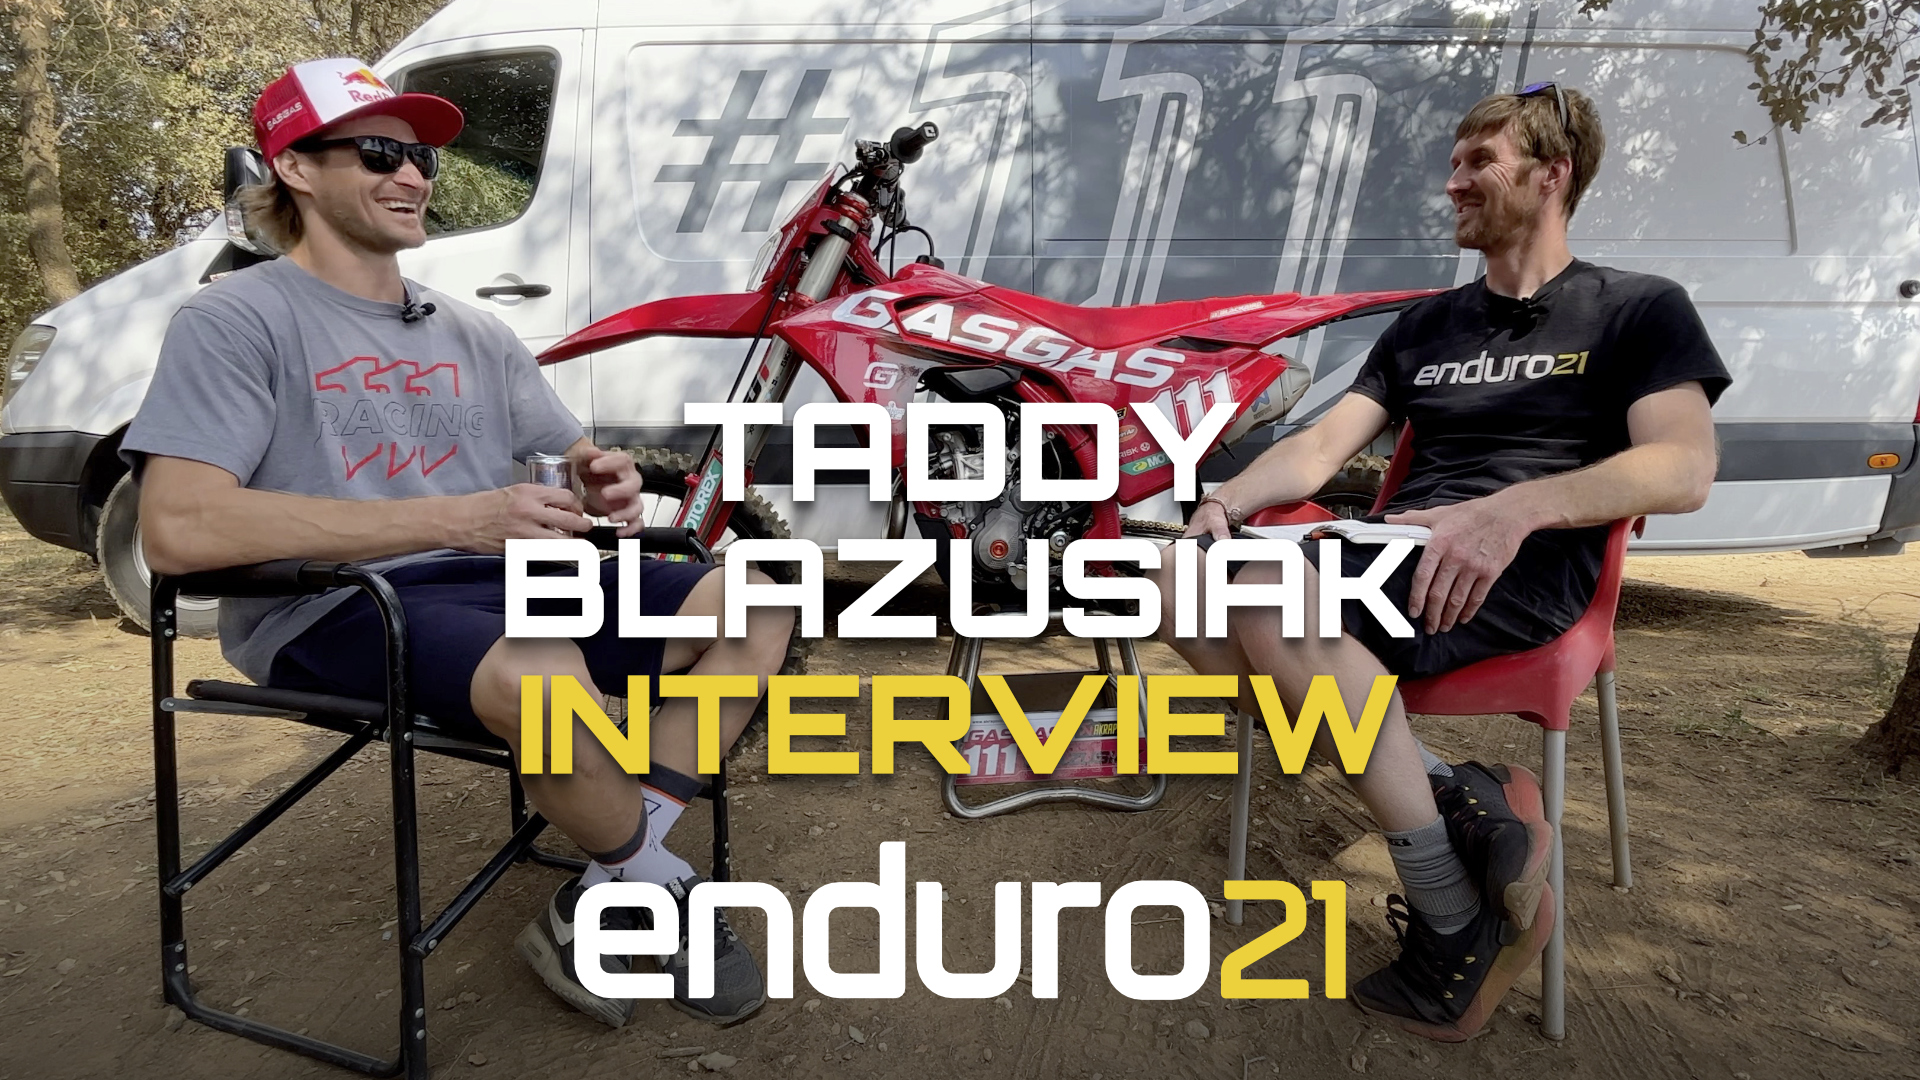 Taddy Blazusiak Interview – “Do I still want to be the first guy at the first turn? Absolutley, 100%”